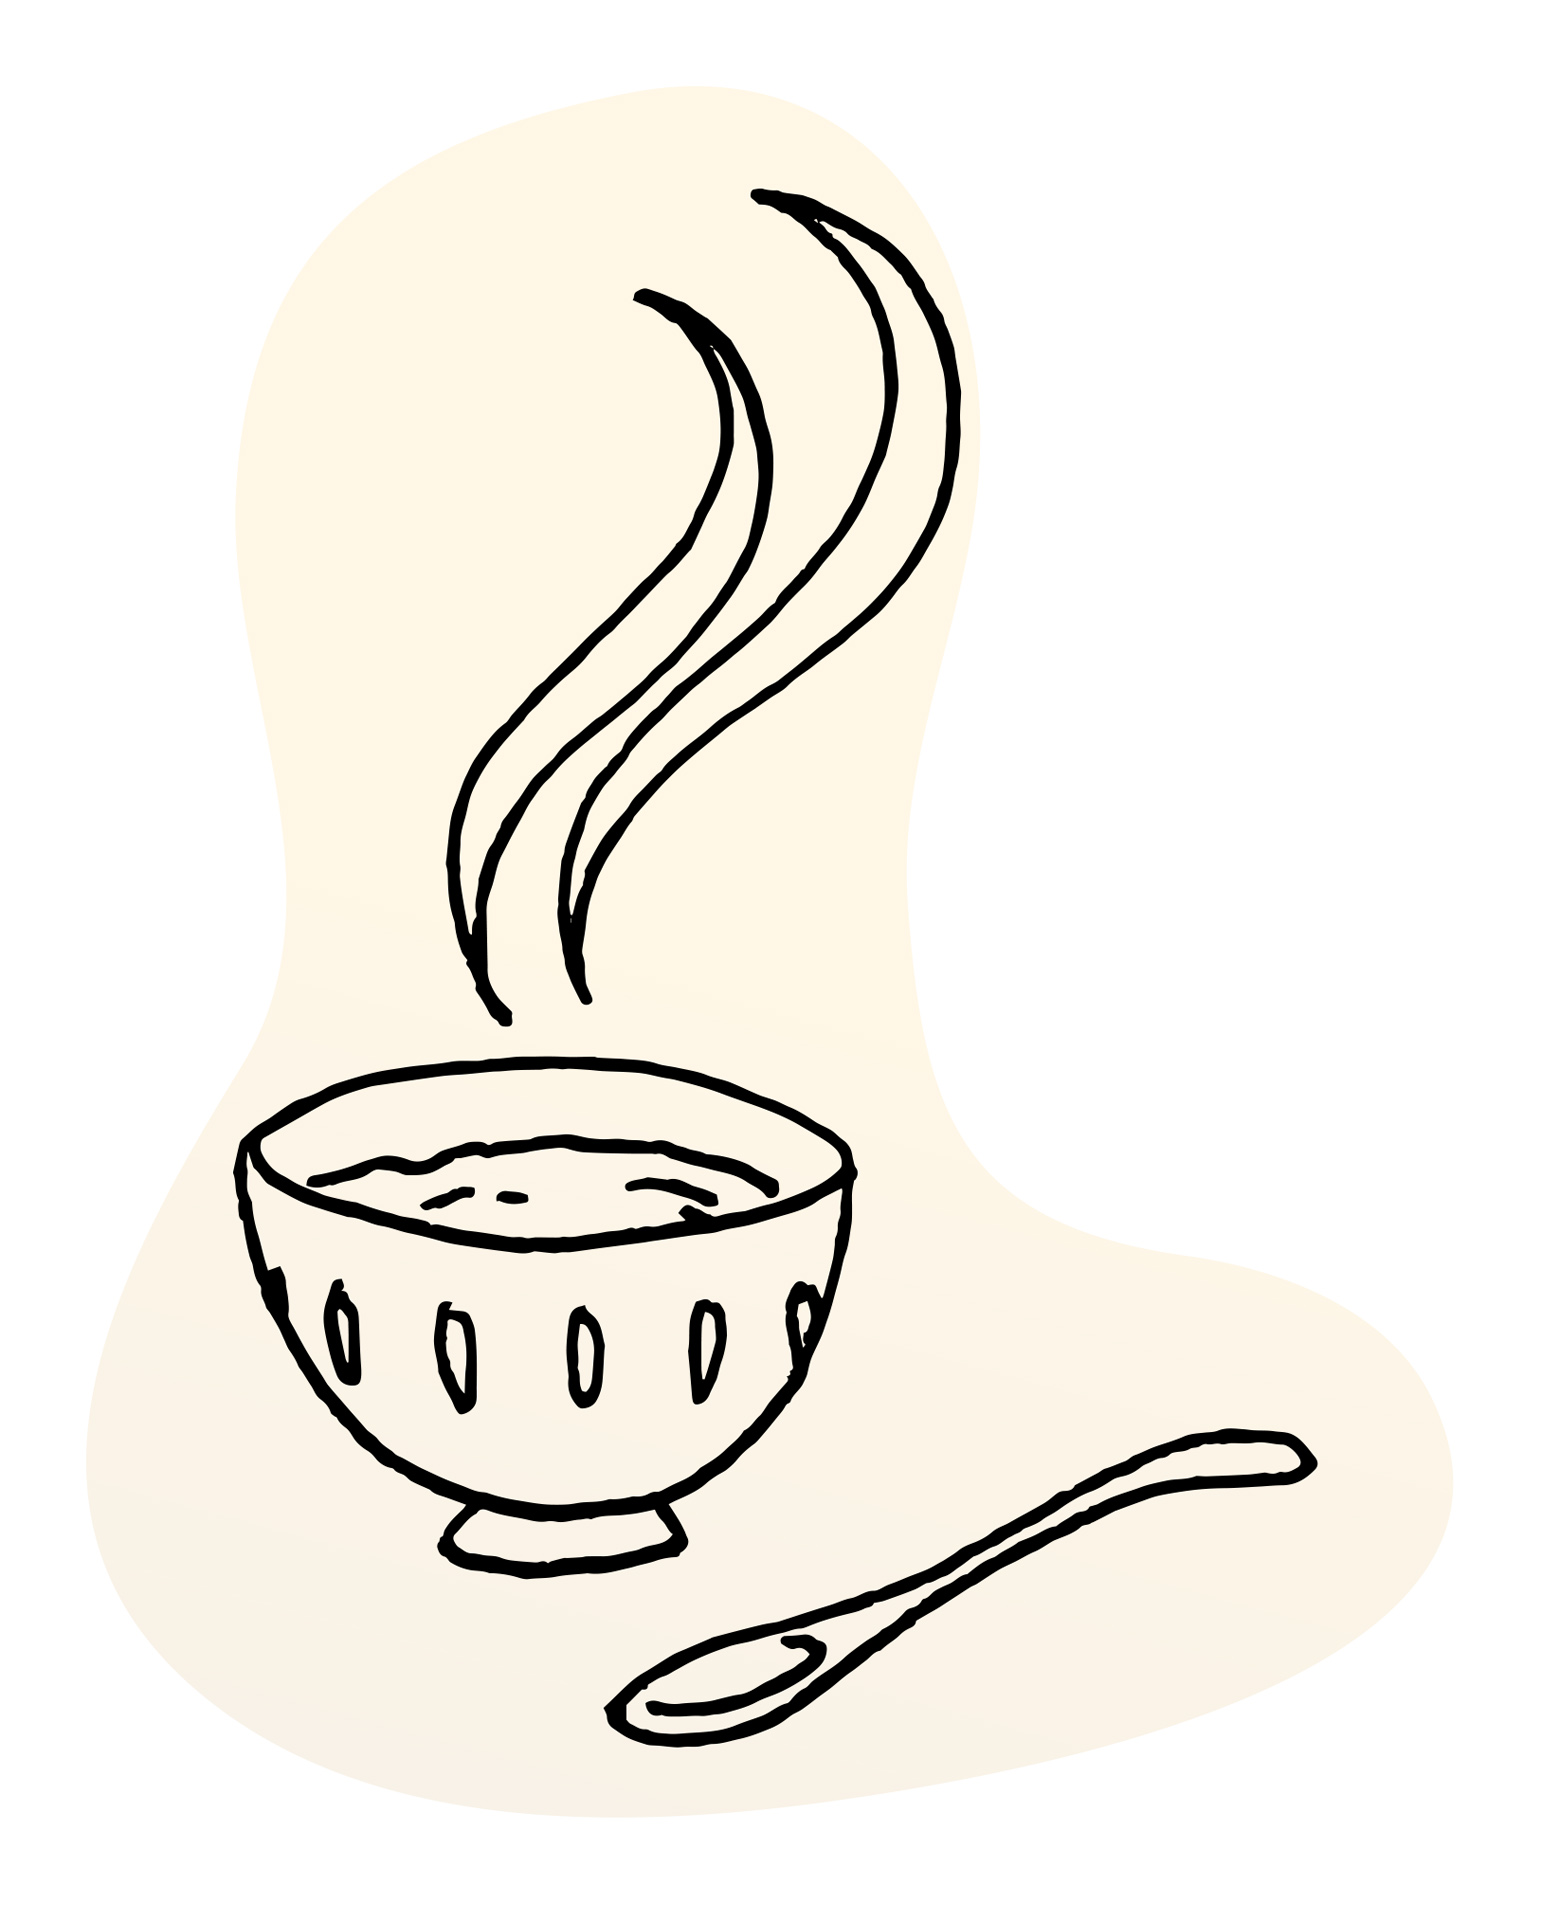 Line illustration of a cup of hot tea, steam rising above it, spoon beside it